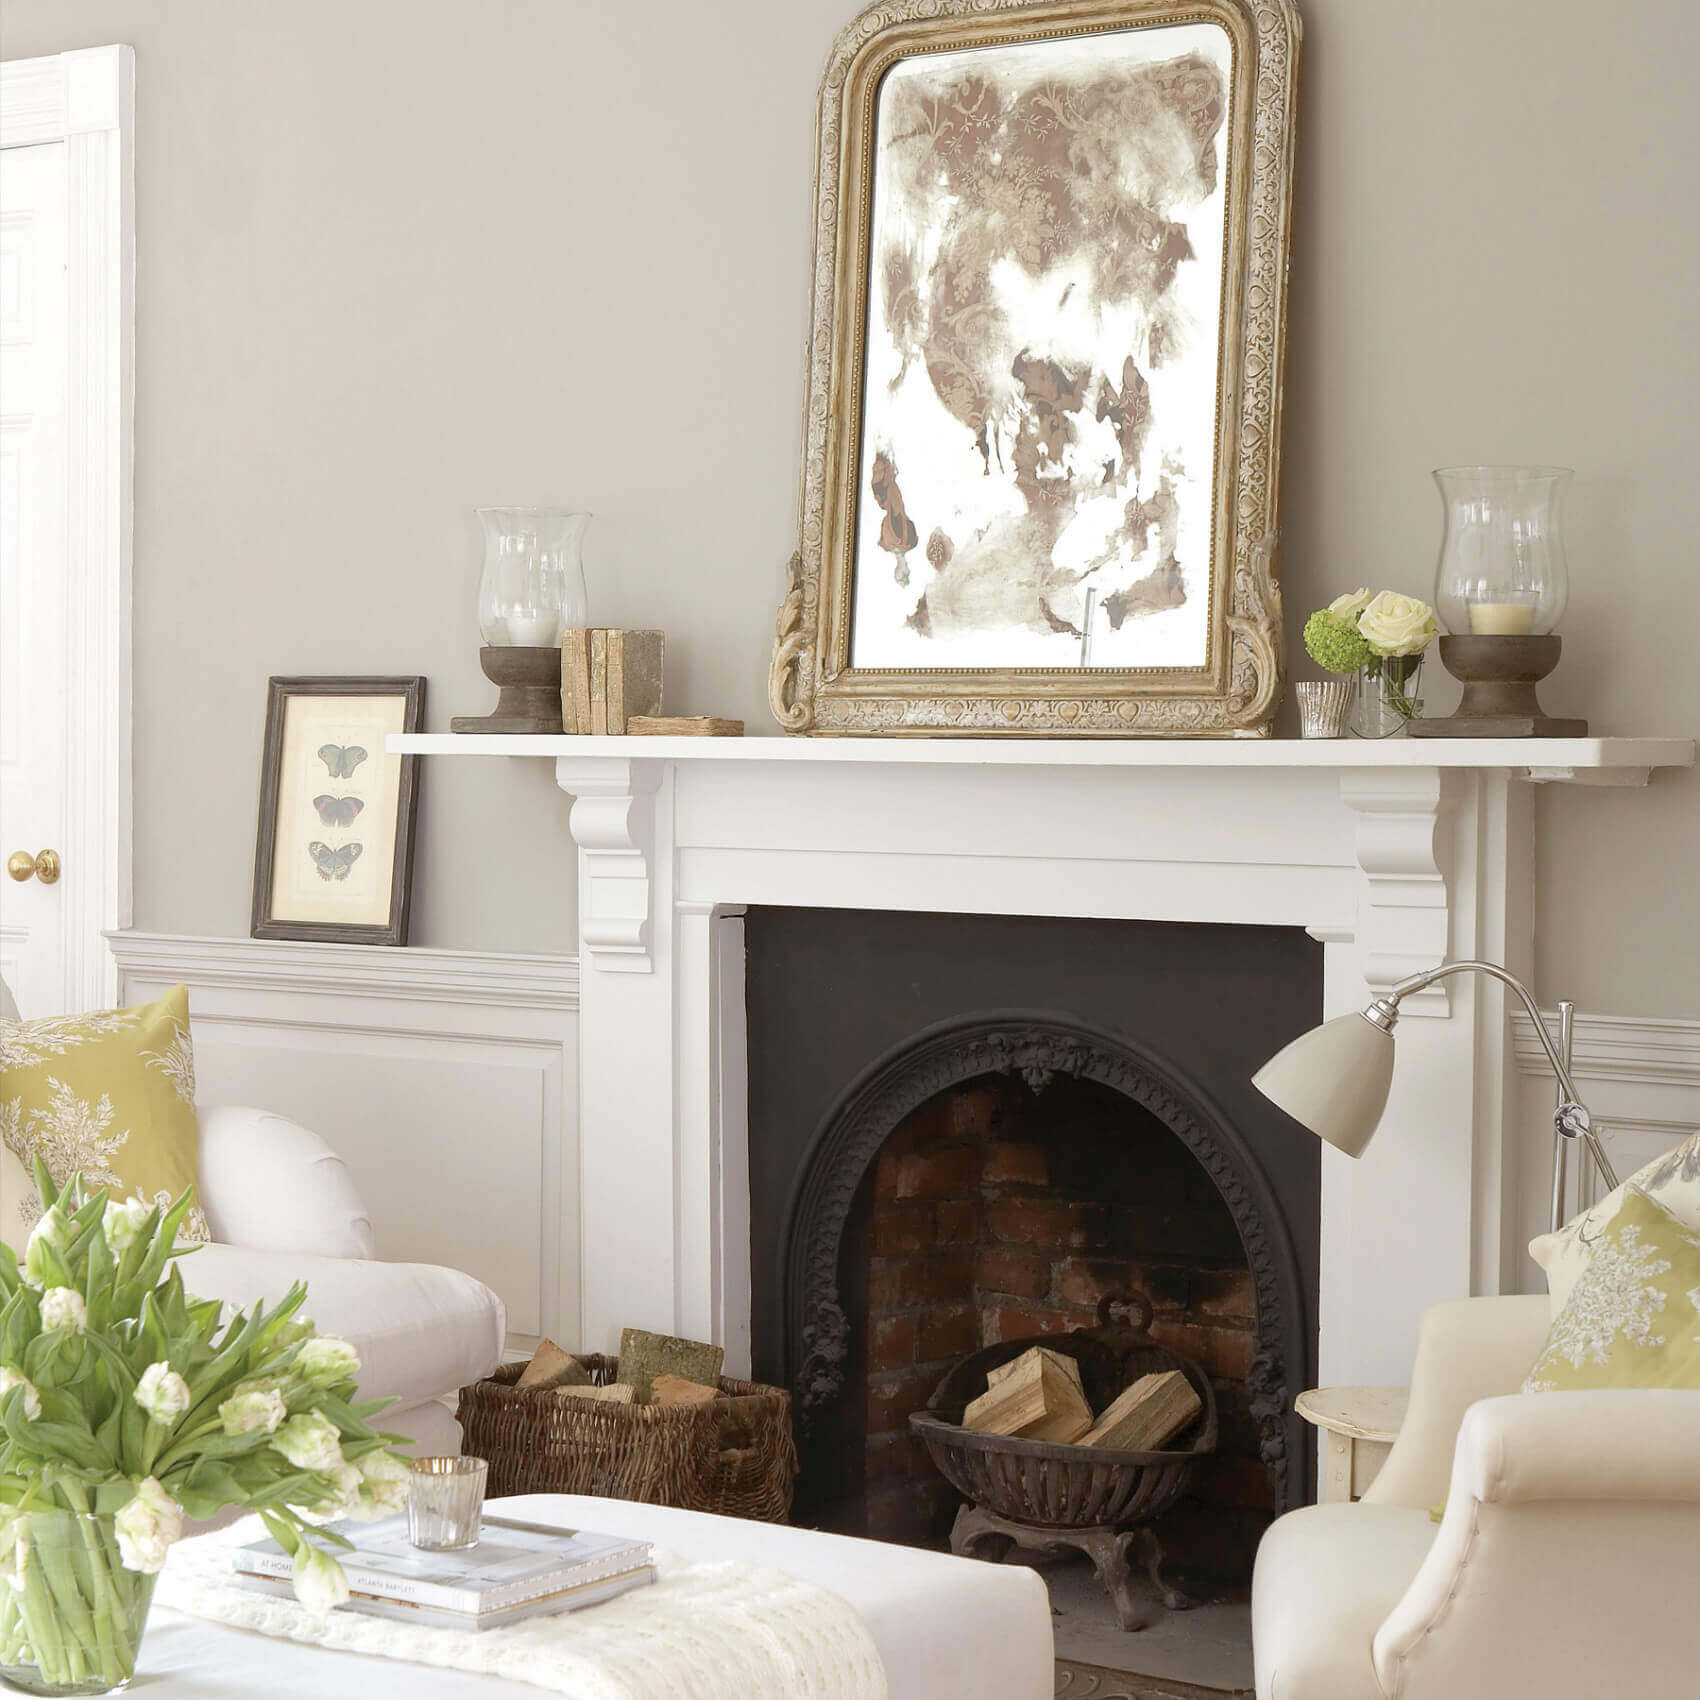 Interior paint Little Greene color grey French Grey (113).